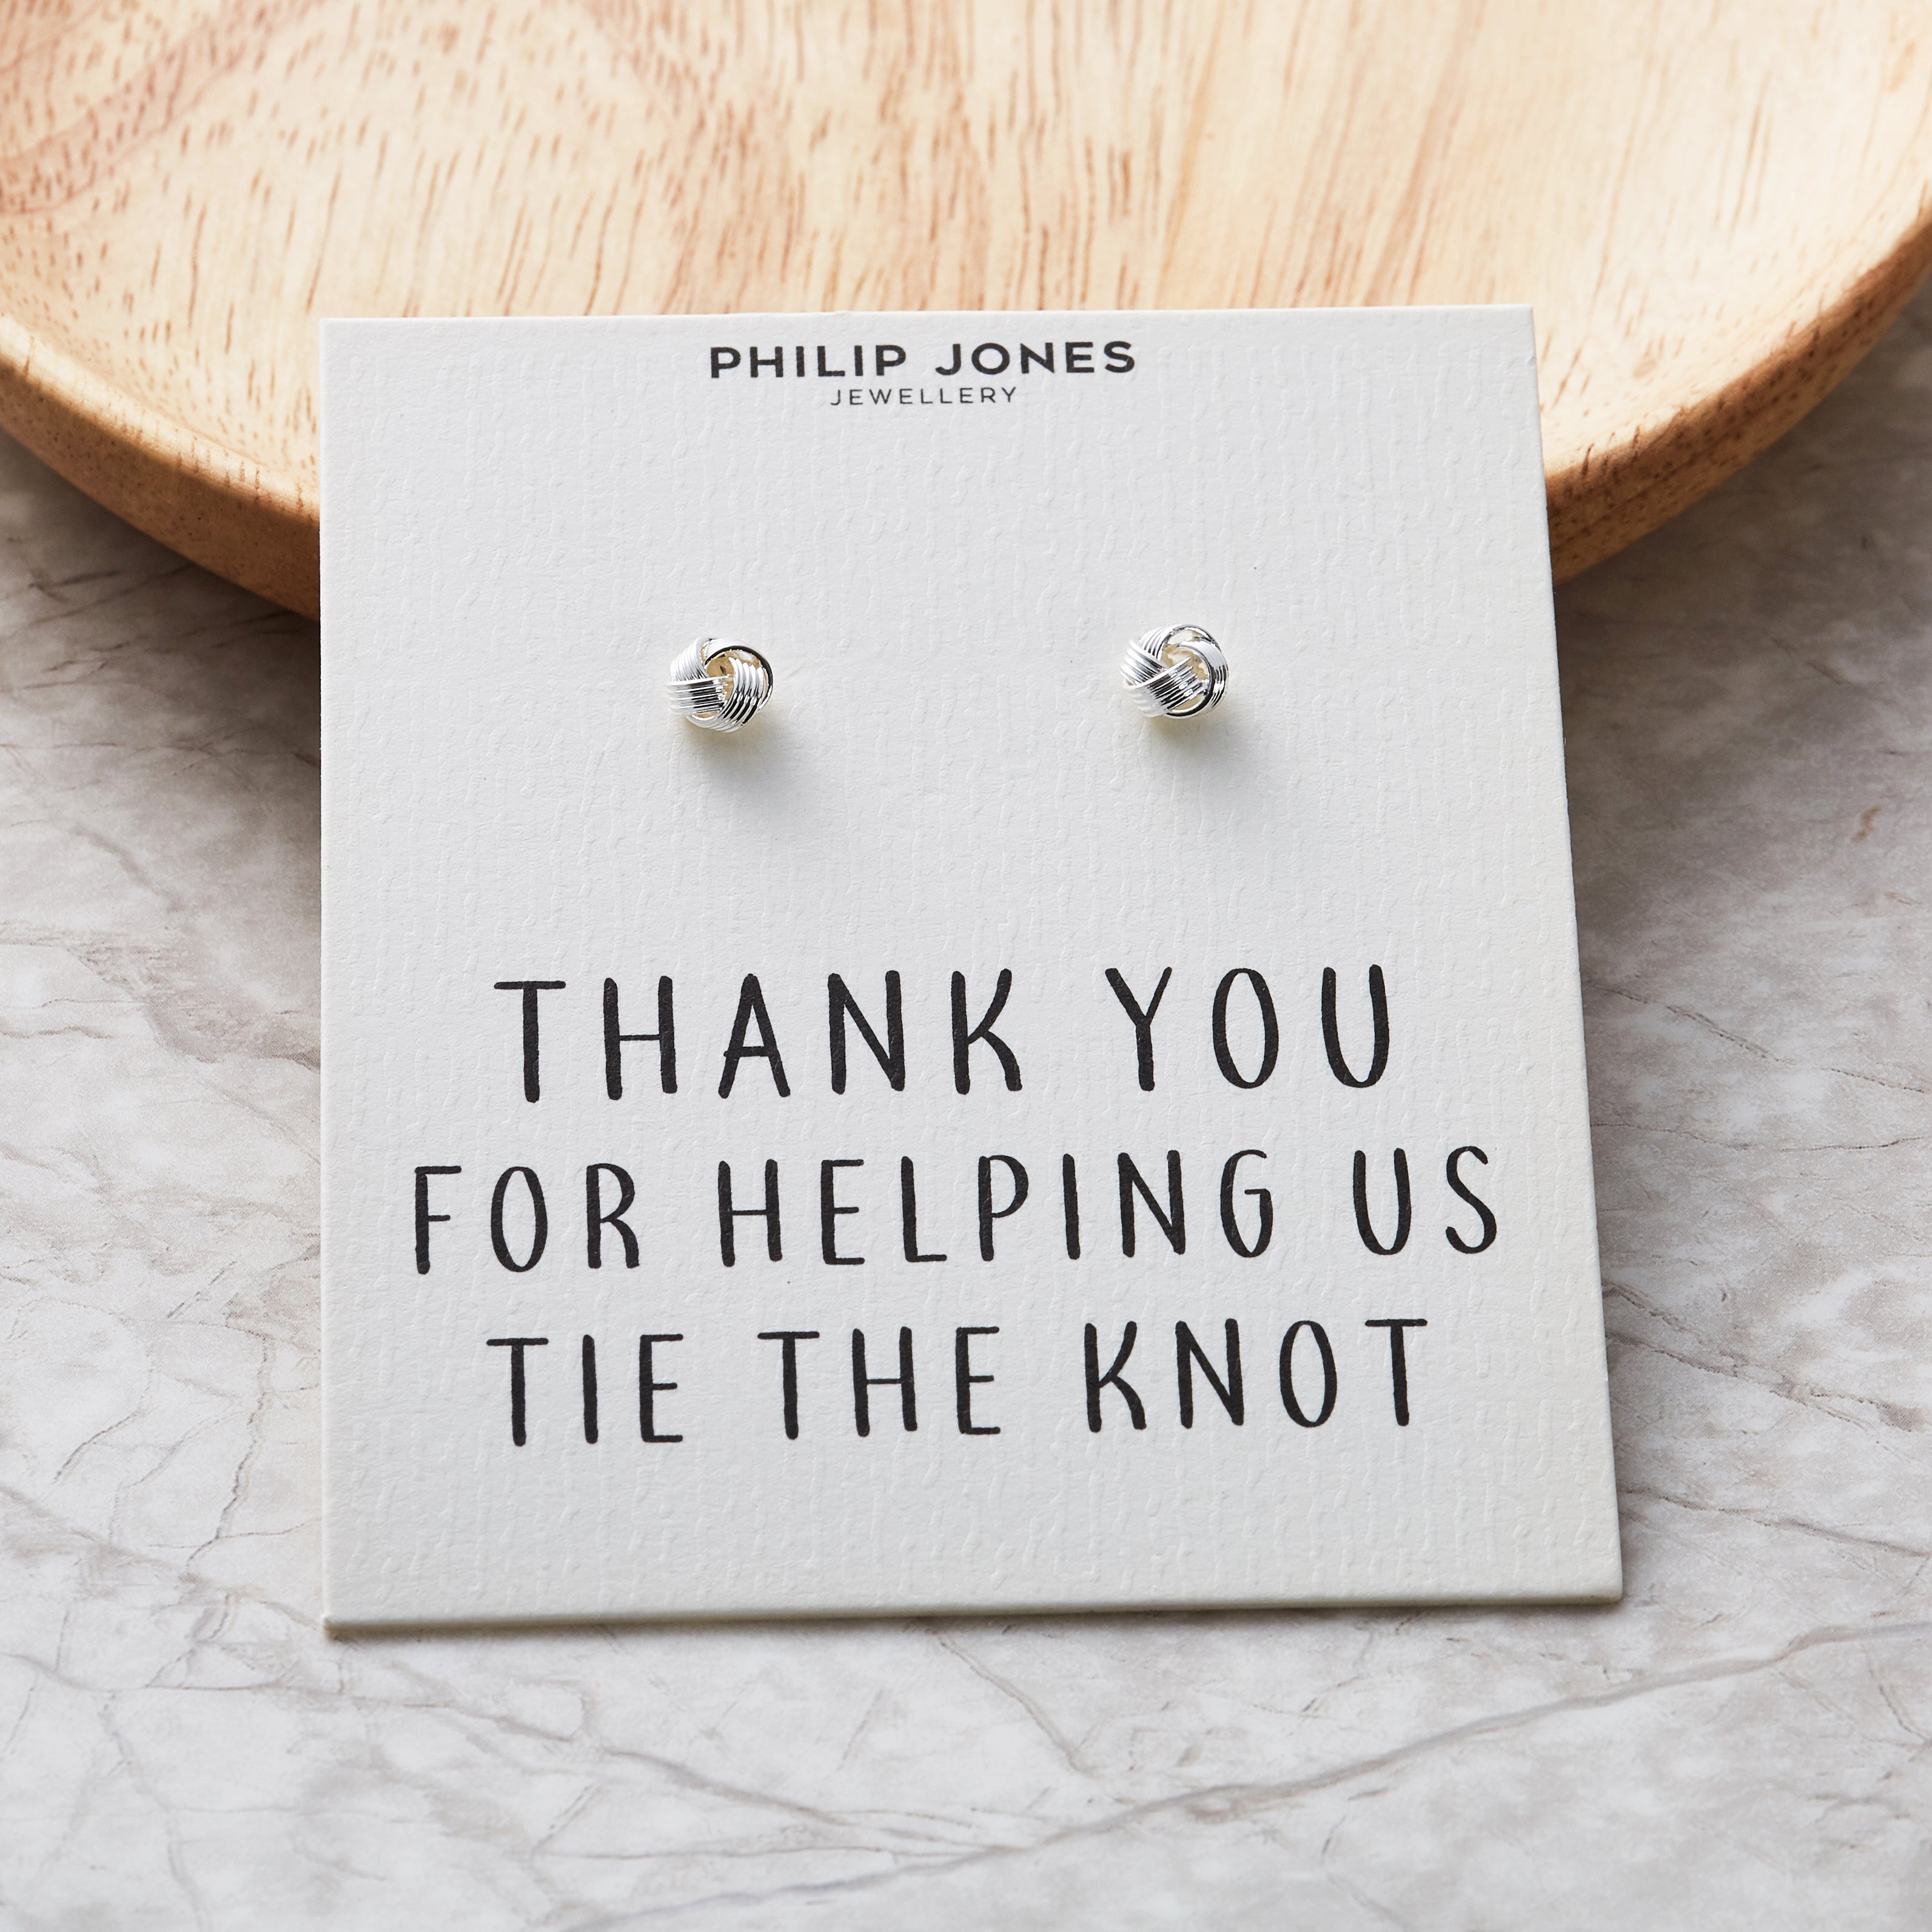 Silver Plated Thank You for Helping us Tie The Knot Earrings with Quote Card